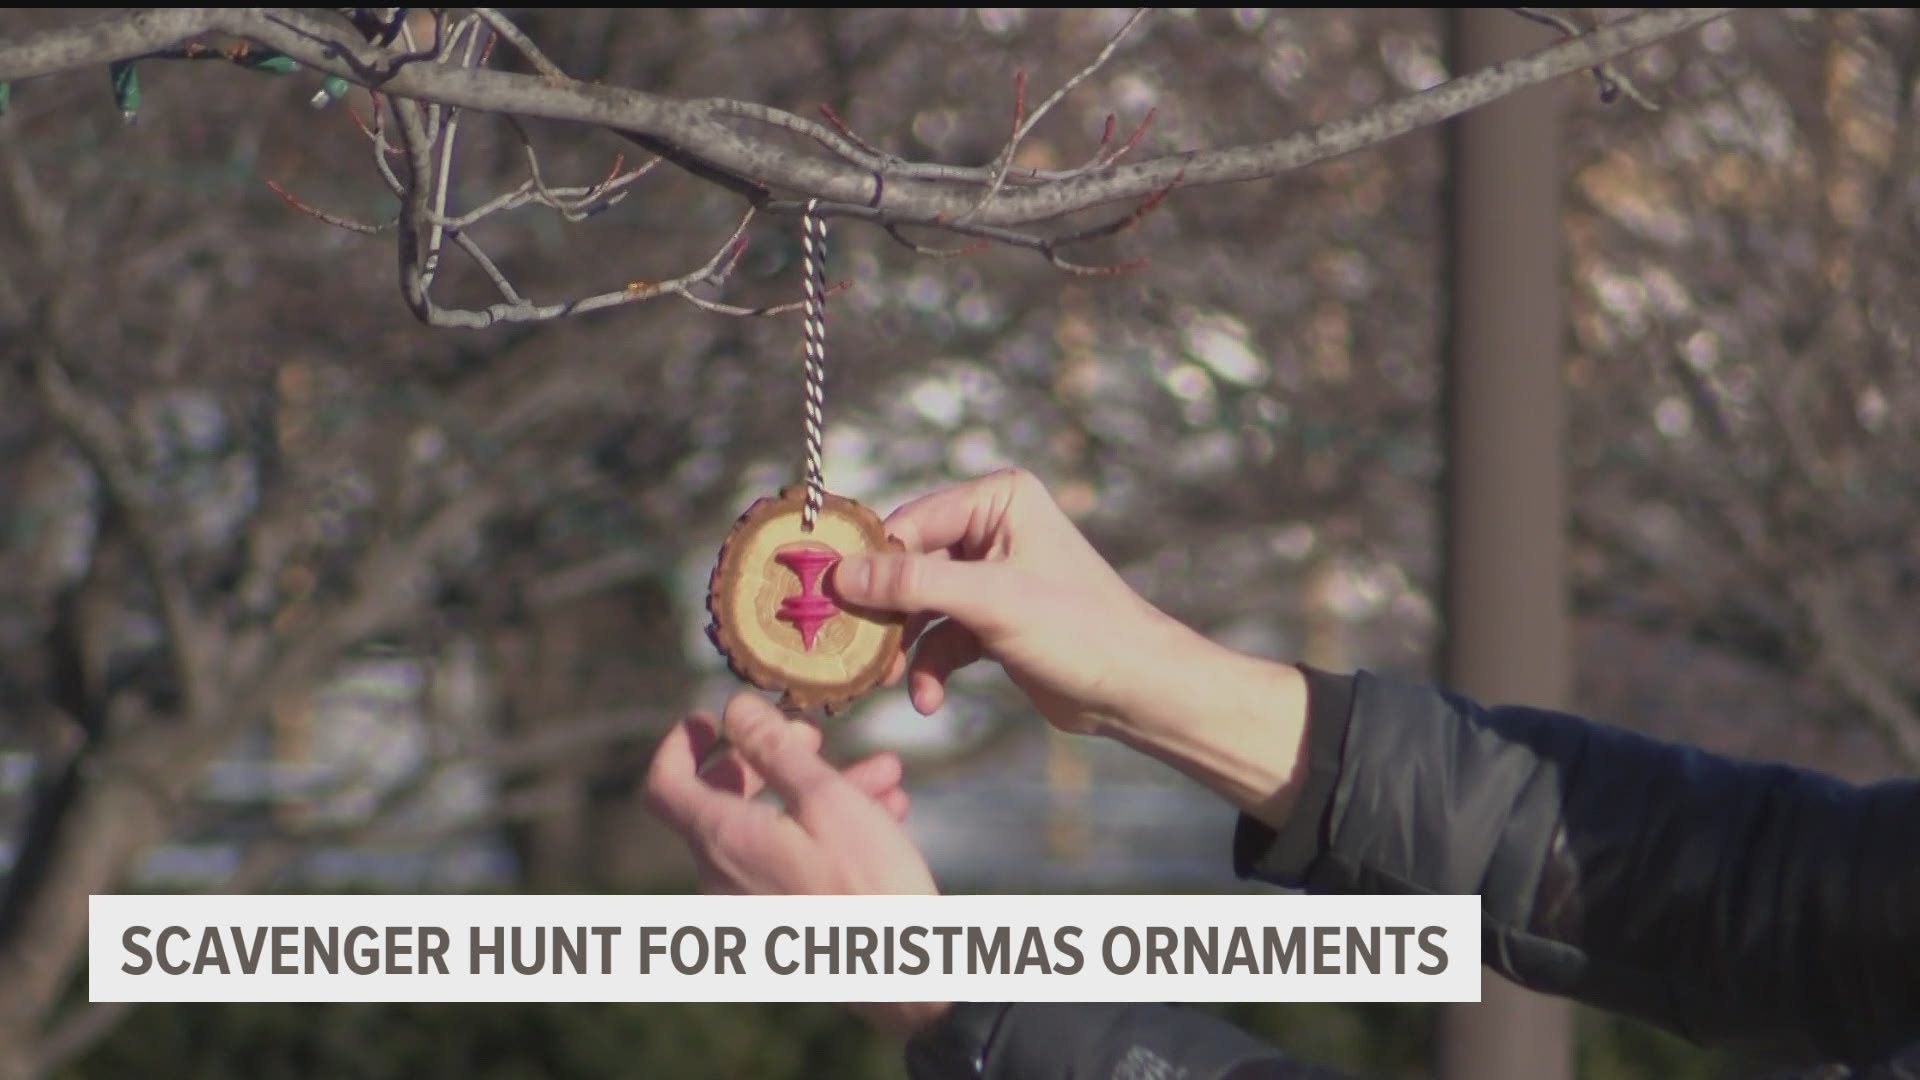 Ten artists are tasked with the opportunity to each create 15 unique ornaments and hide them near or around local businesses in different parts of downtown.